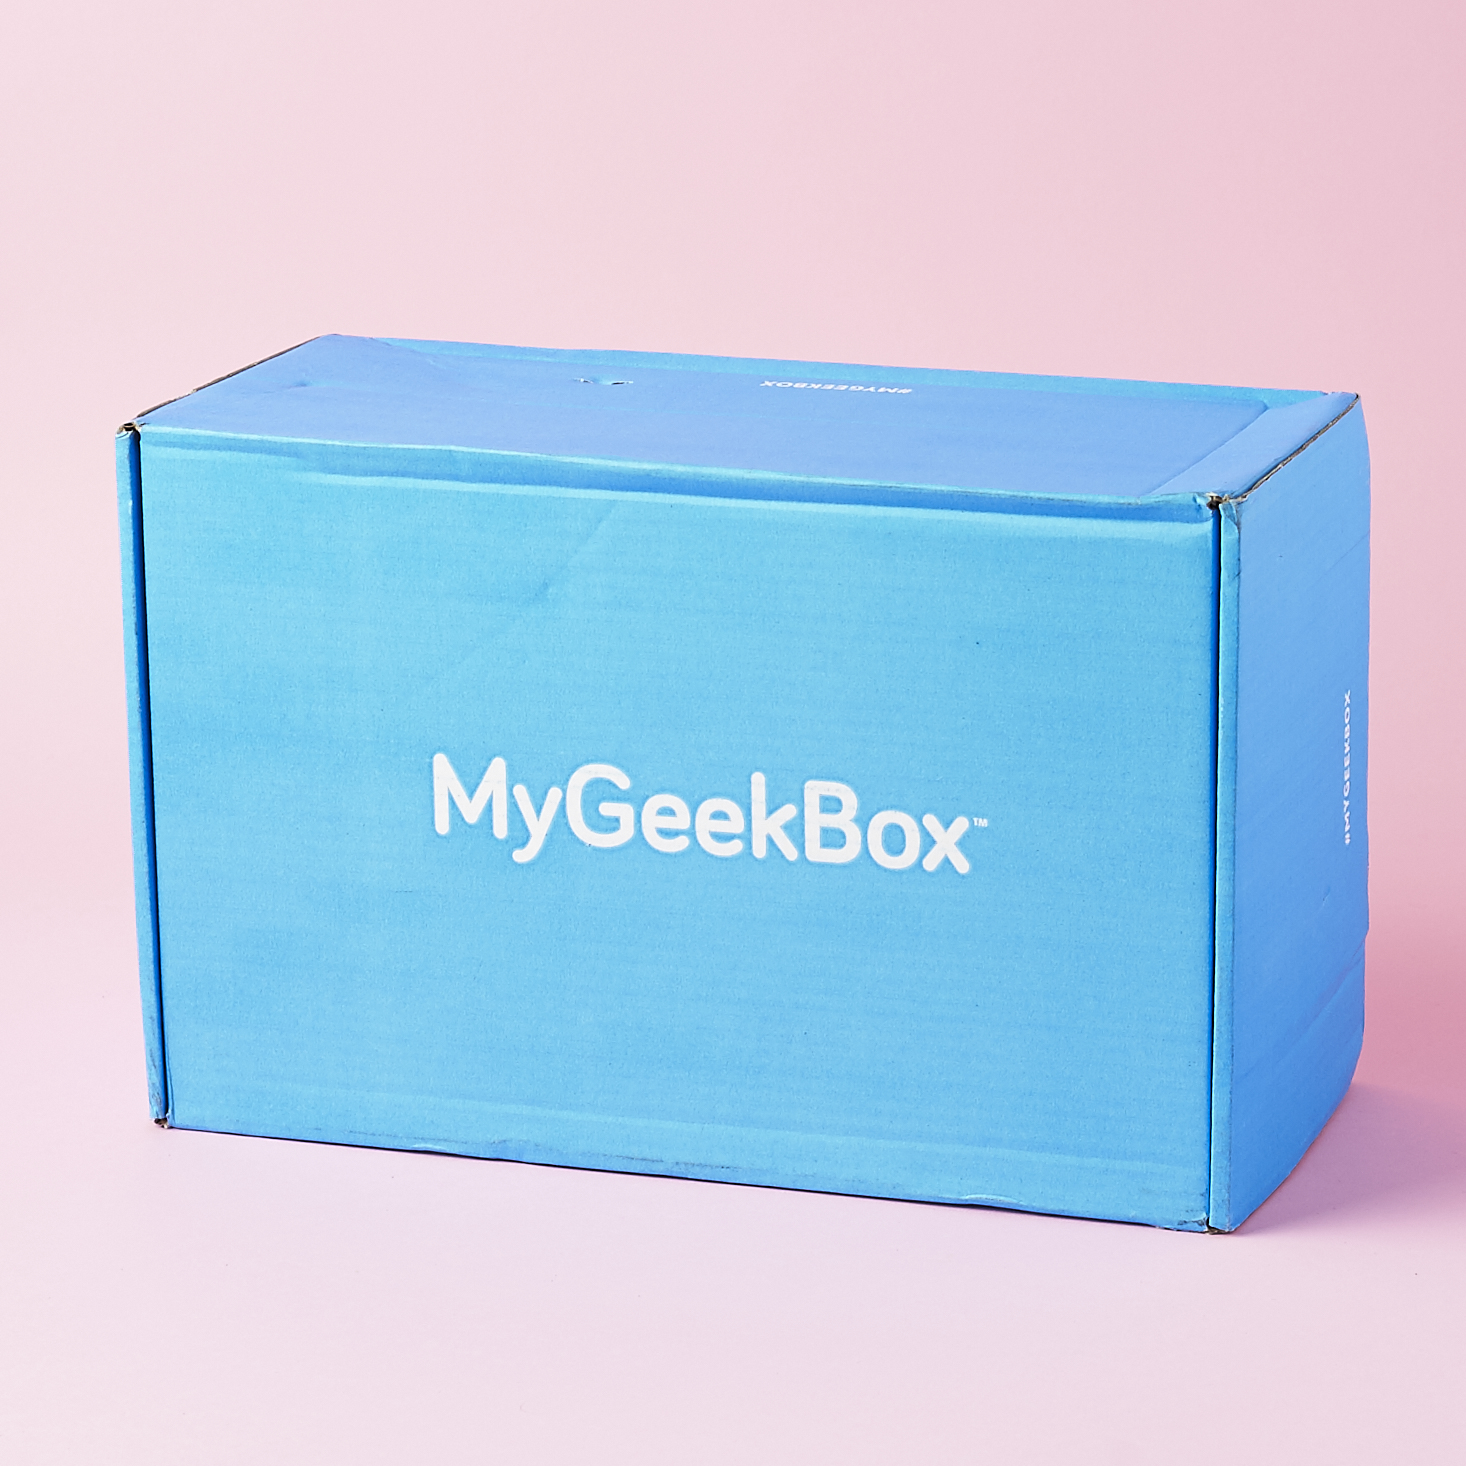 My Geek Box Black Friday Deals – 4 Limited Edition Boxes On Sale!